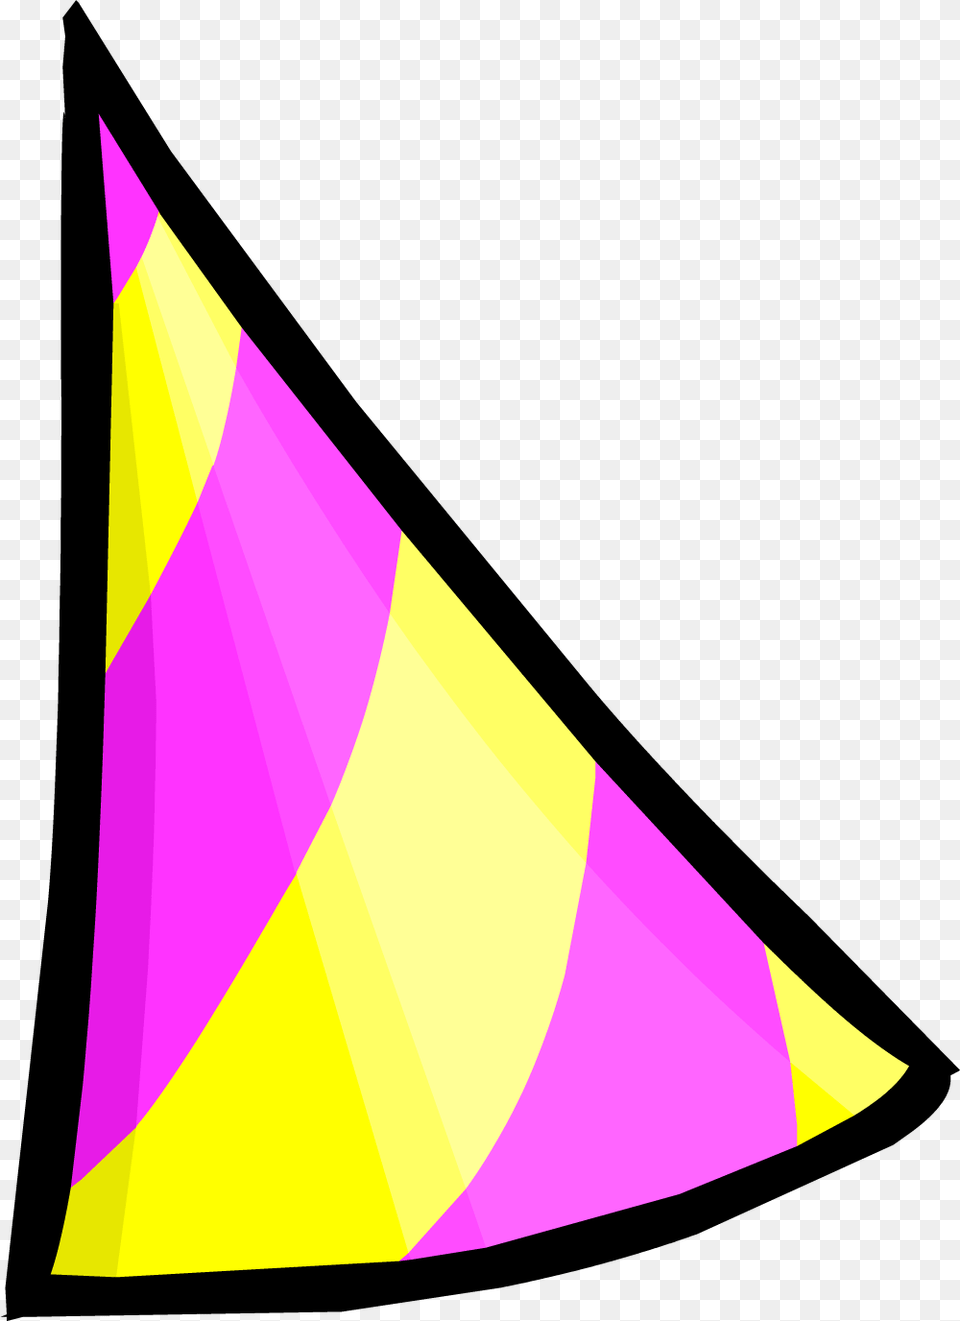 Beta Hat Colors Reversed Club Penguin Island Beta Hat, Clothing, Rocket, Weapon, Triangle Free Png